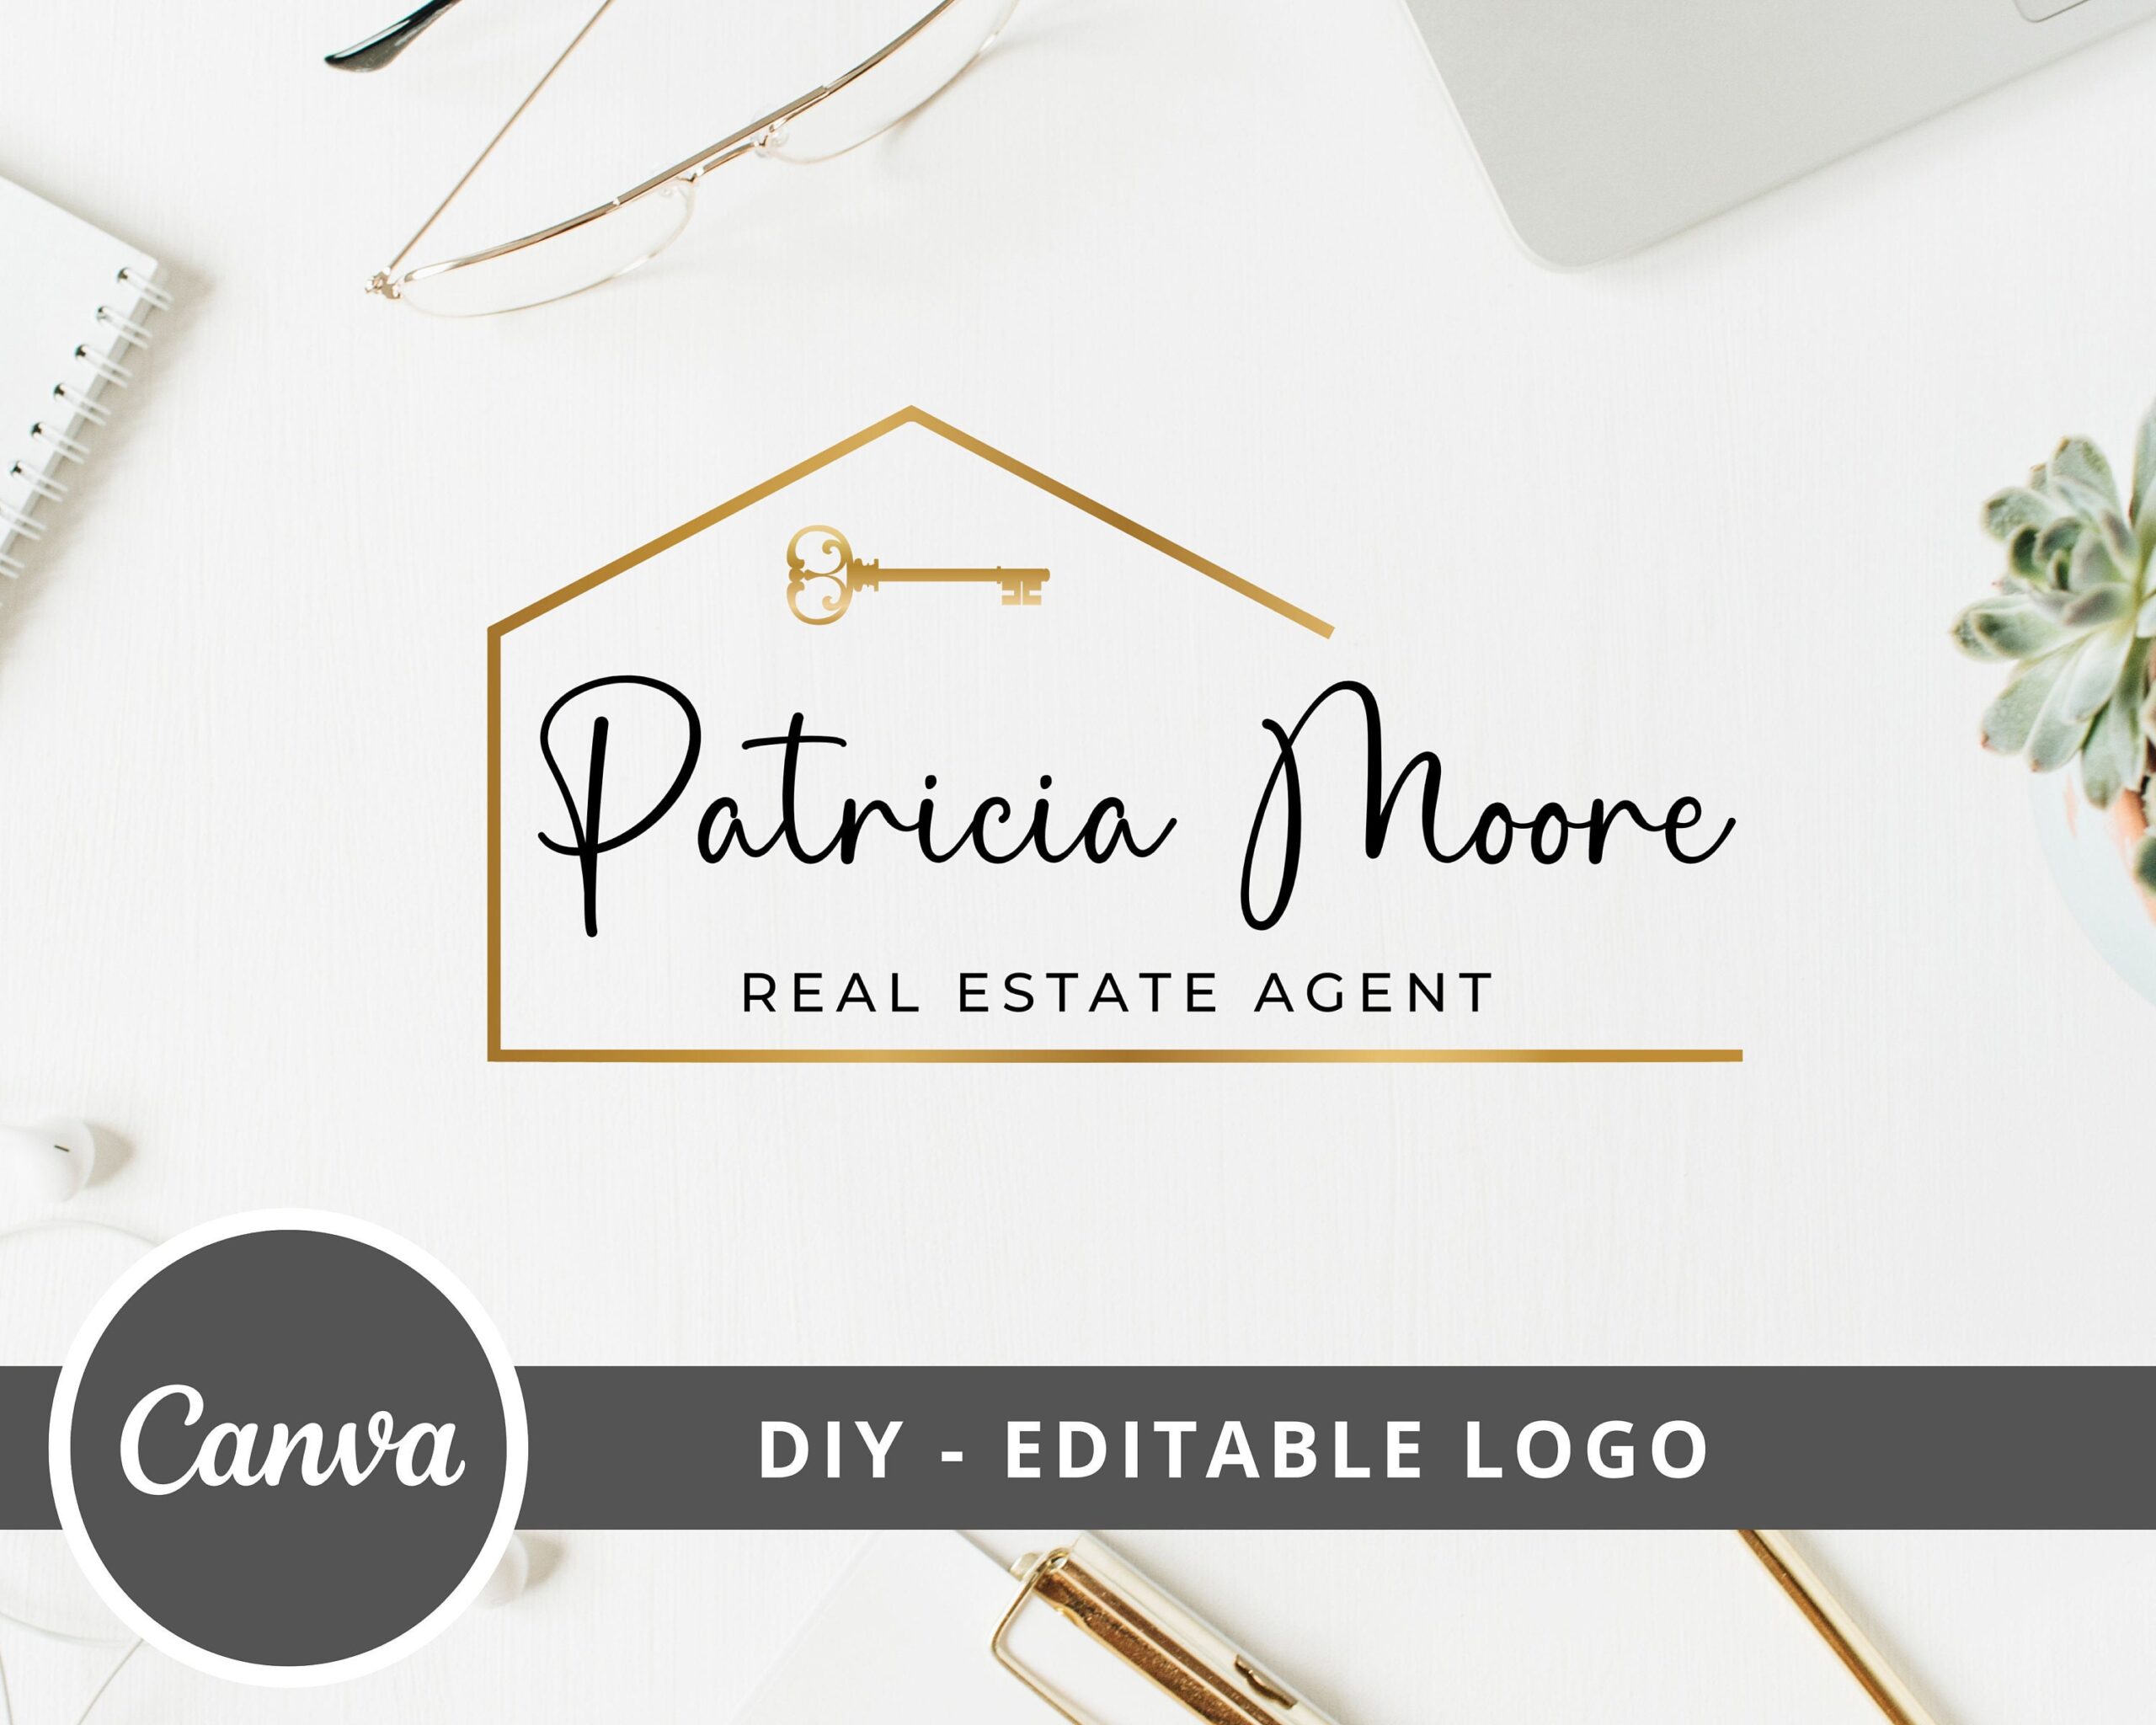 DIY Real Estate Logo Design, Fully Editable, Canva Template, Key Logo, Realtor Logo, Real Estate Branding is a business logo, Instant Access